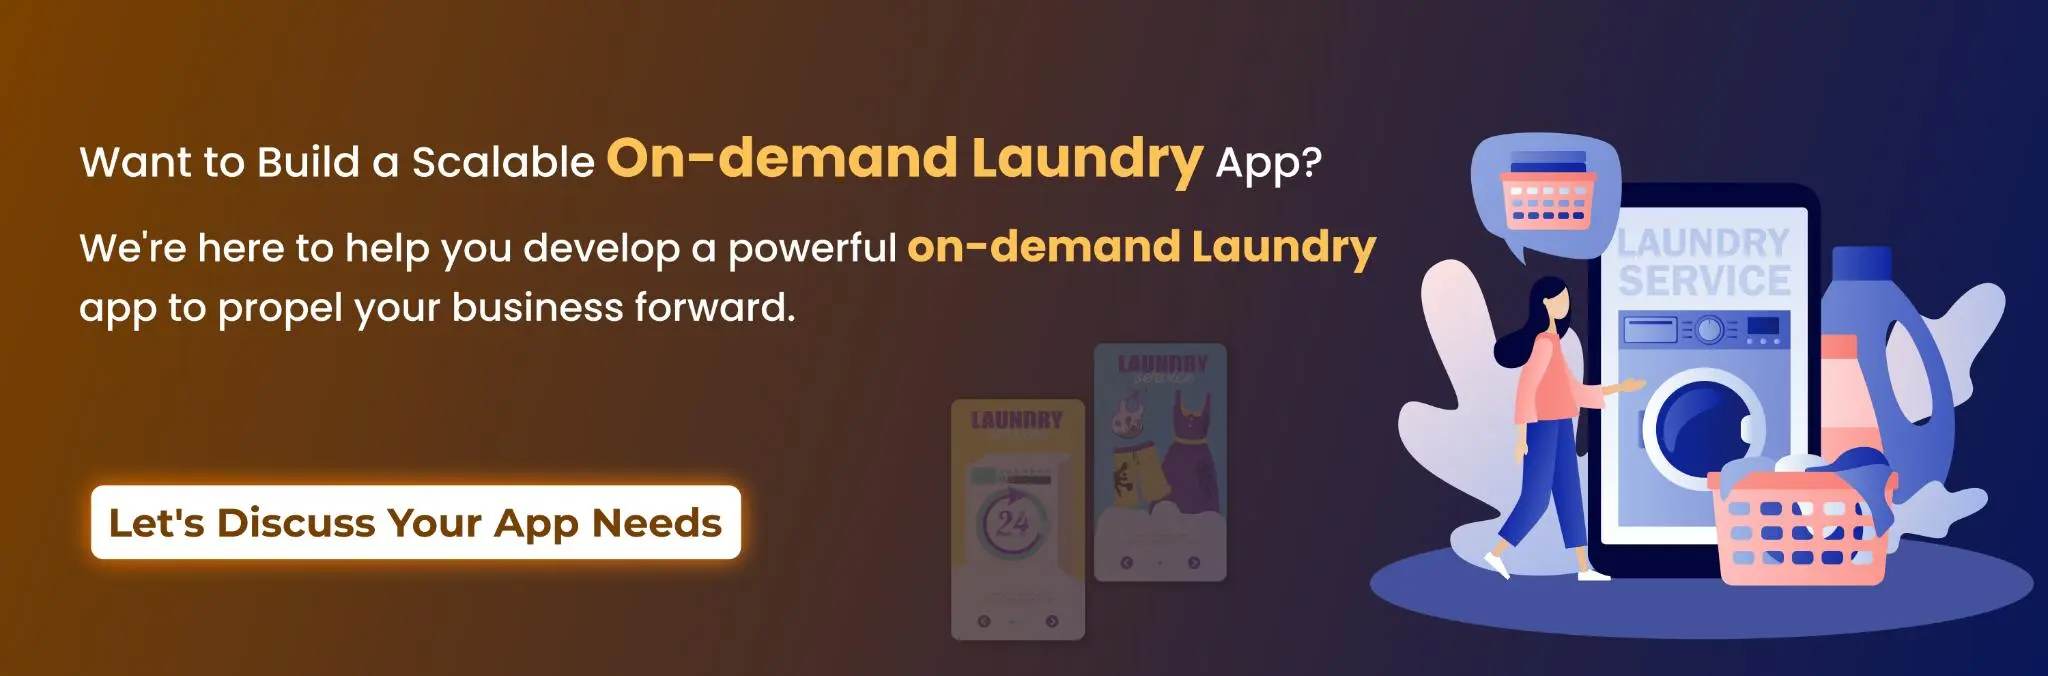 scalable on demand laundry app